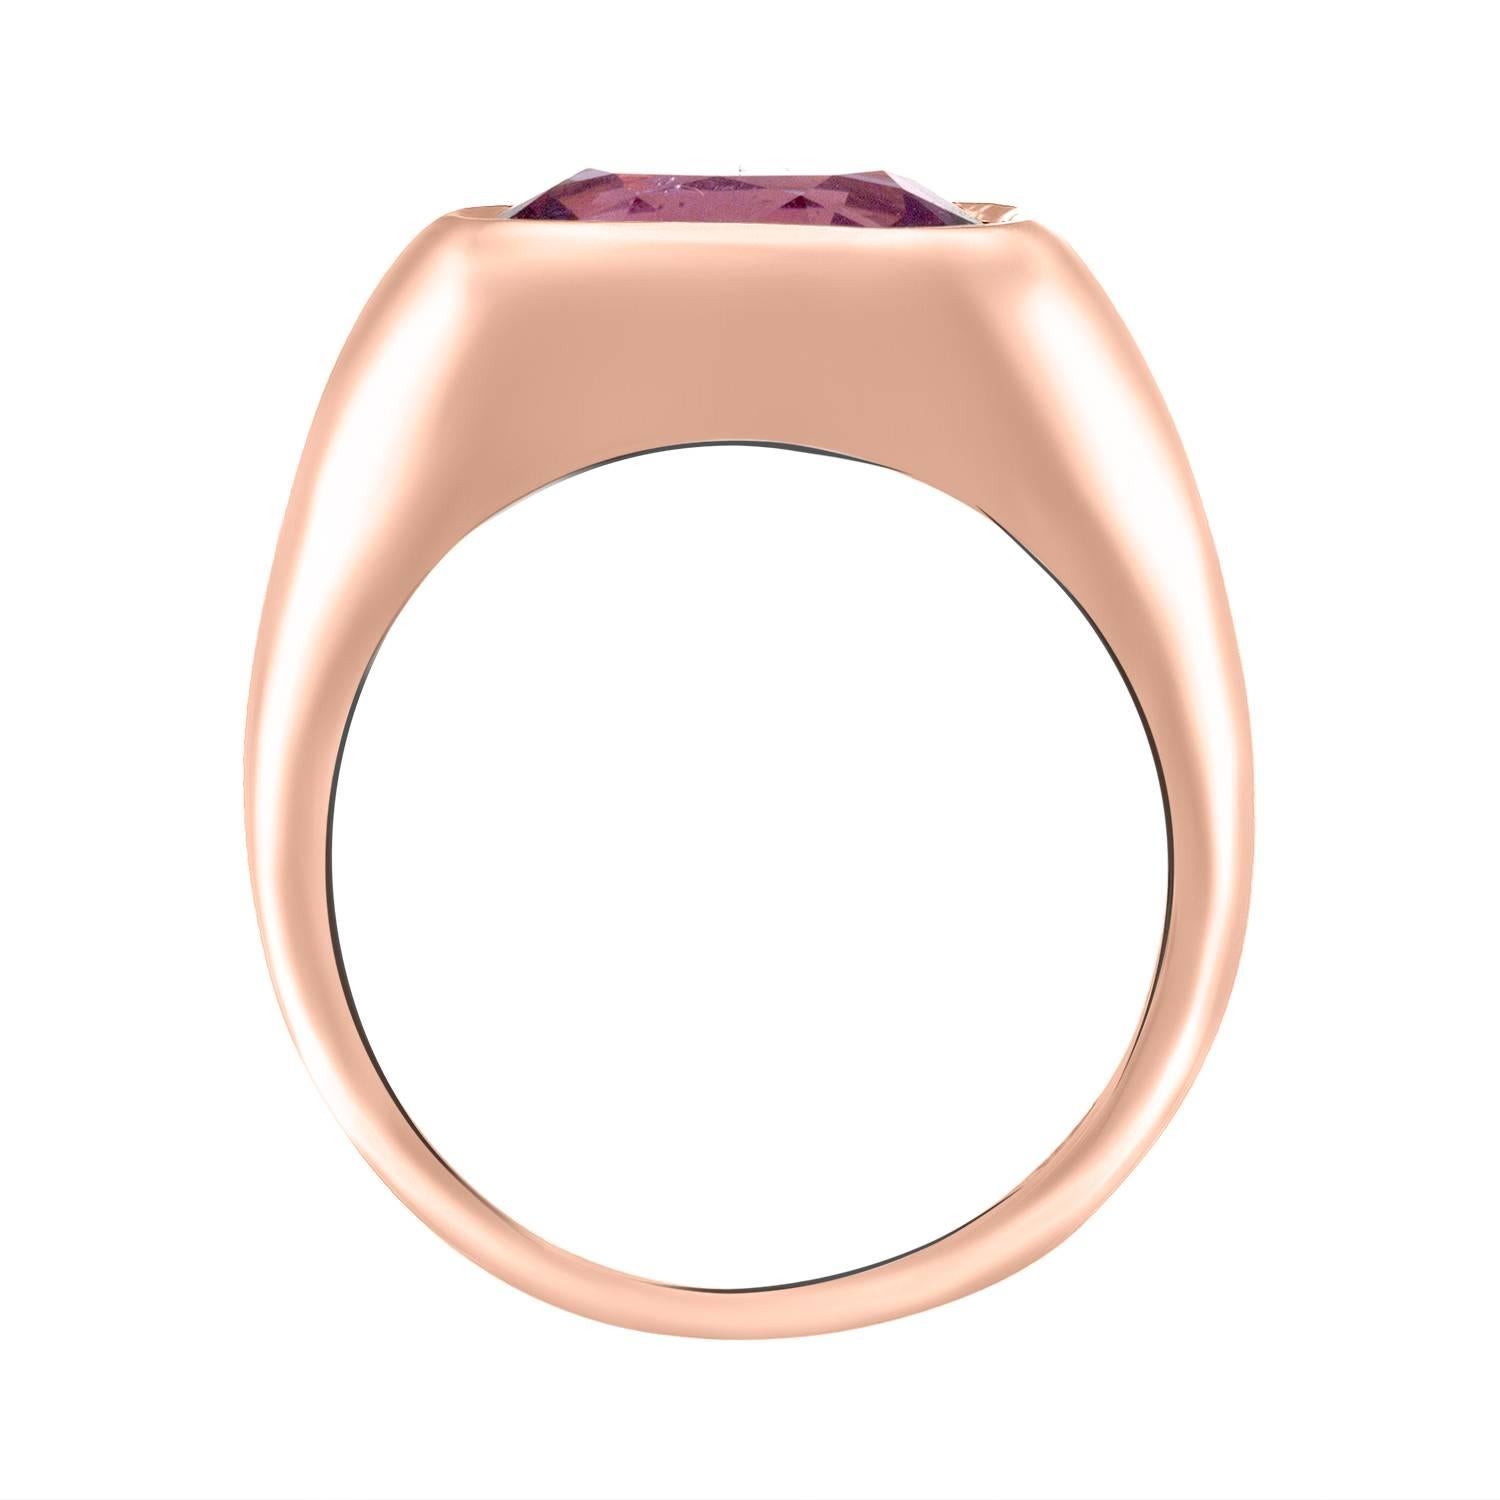 Shah & Shah's handmade 18 karat rose gold bezel ring with a 3.0 carat oval purple sapphire. 

The ring is a size 6. Initial sizing is complimentary and an insurance appraisal is included with your purchase.